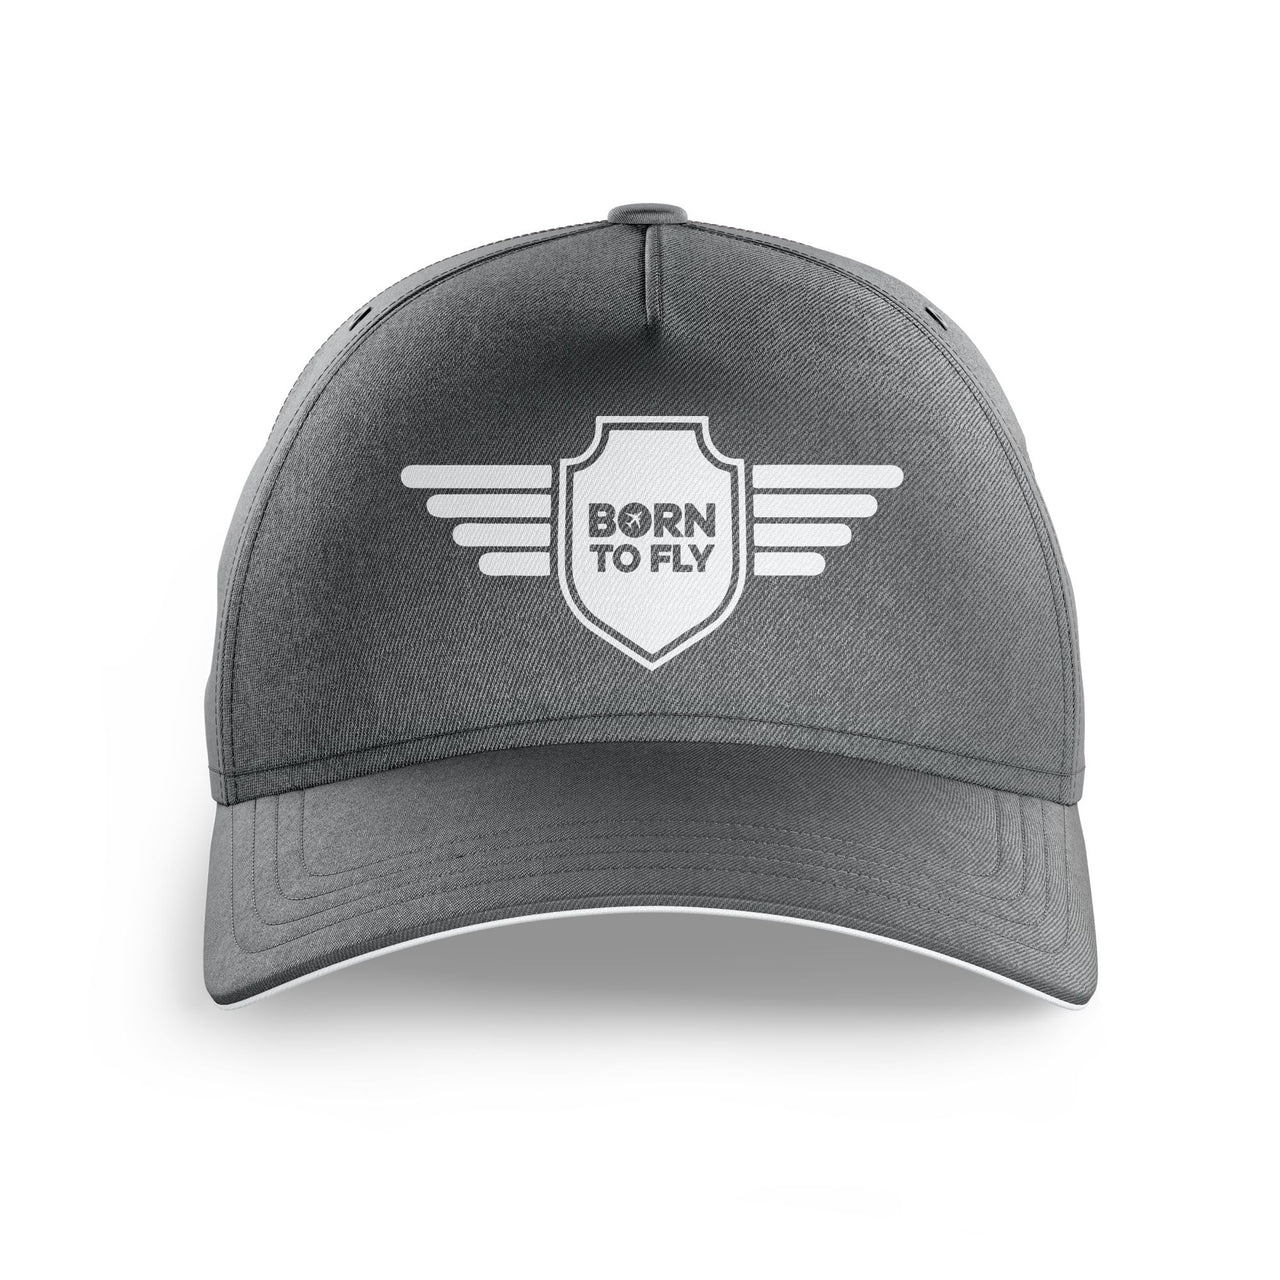 Born To Fly & Badge Printed Hats